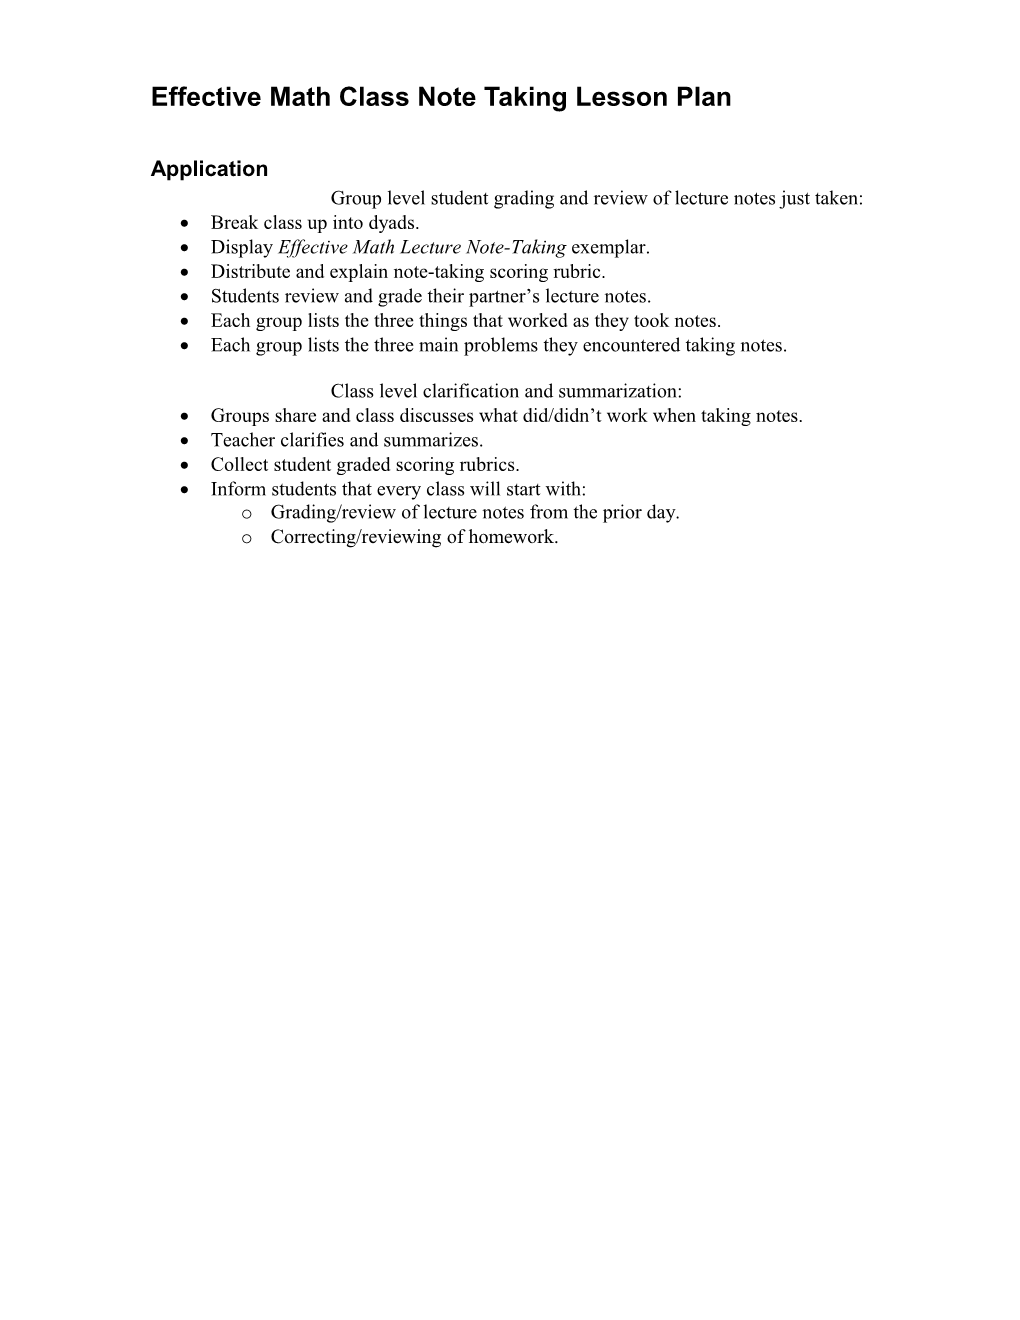 Effective Math Class Note Taking Lesson Plan